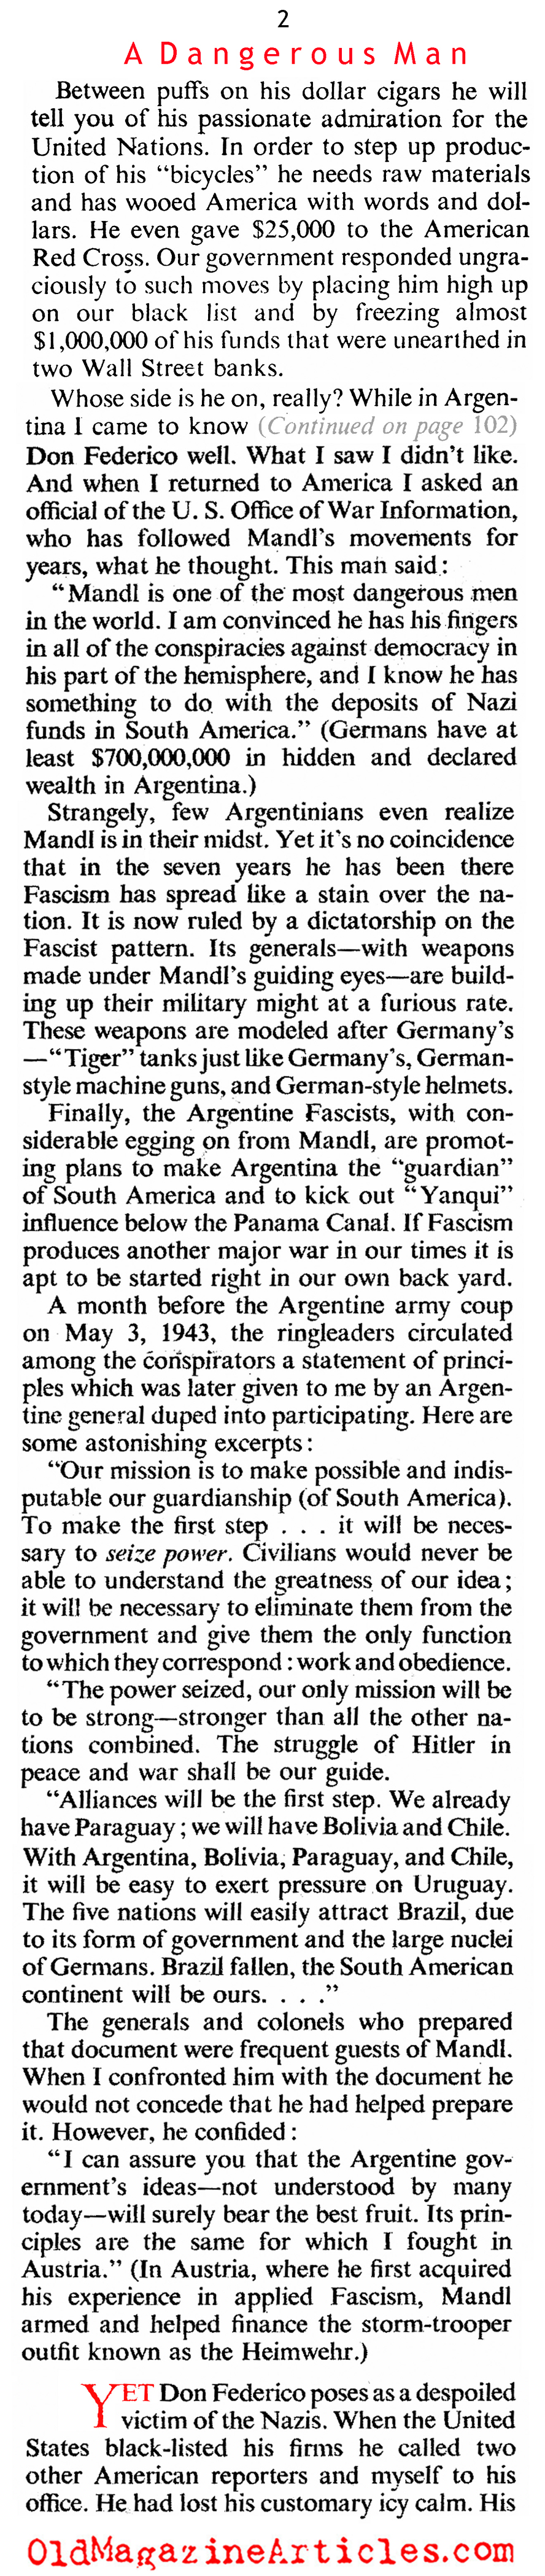 Hitler's Man in Buenos Aires (American Magazine, 1945)